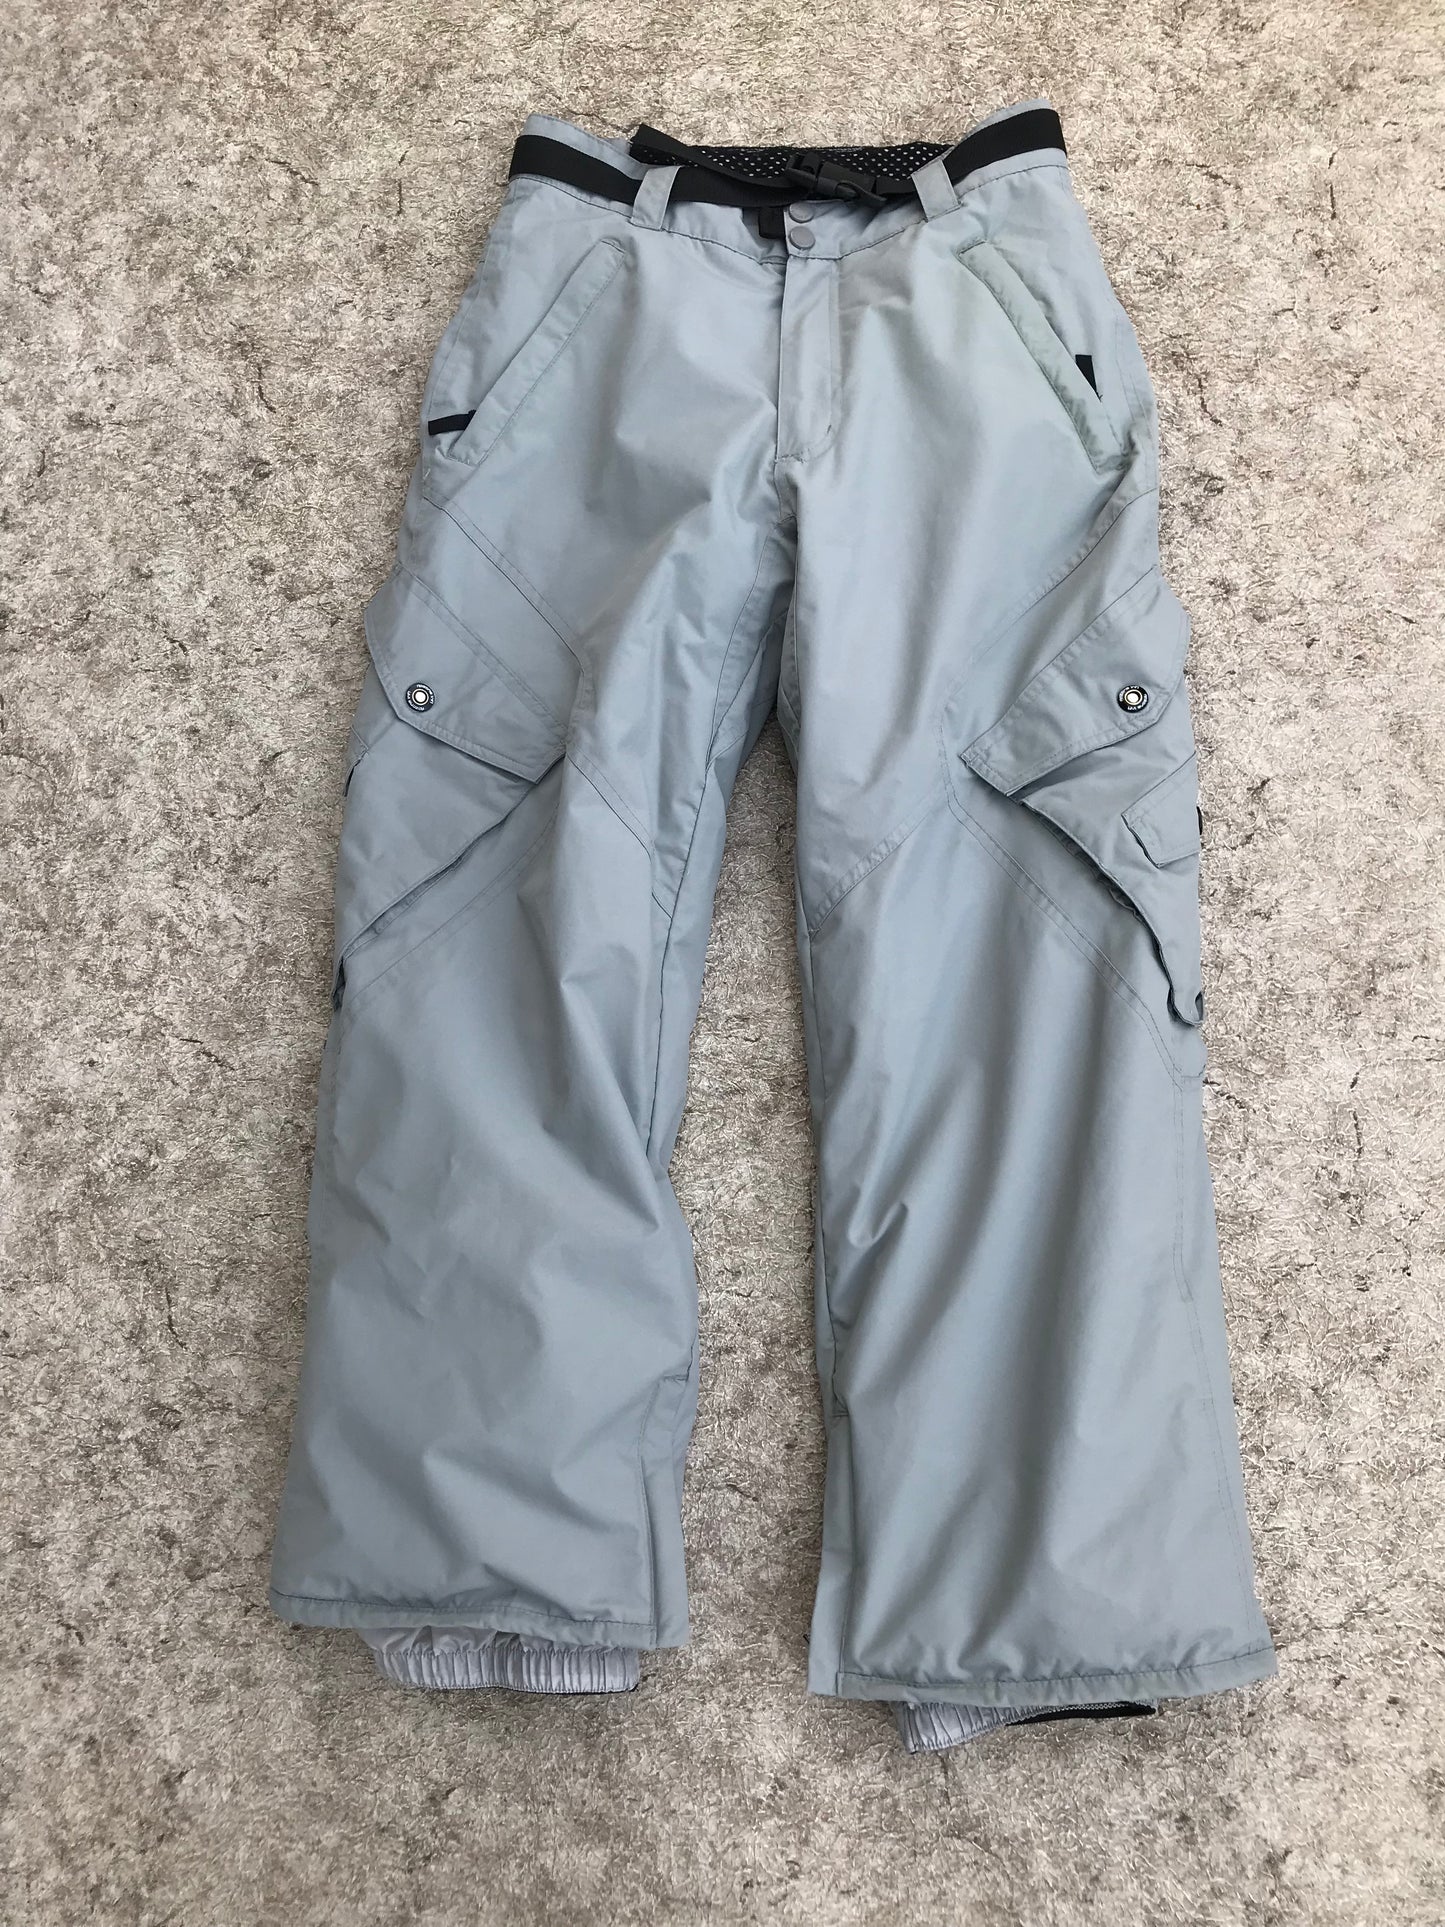 Snow Pants Child Size 14-16 Youth Ripzone Grey Loaded With Pockets Excellent